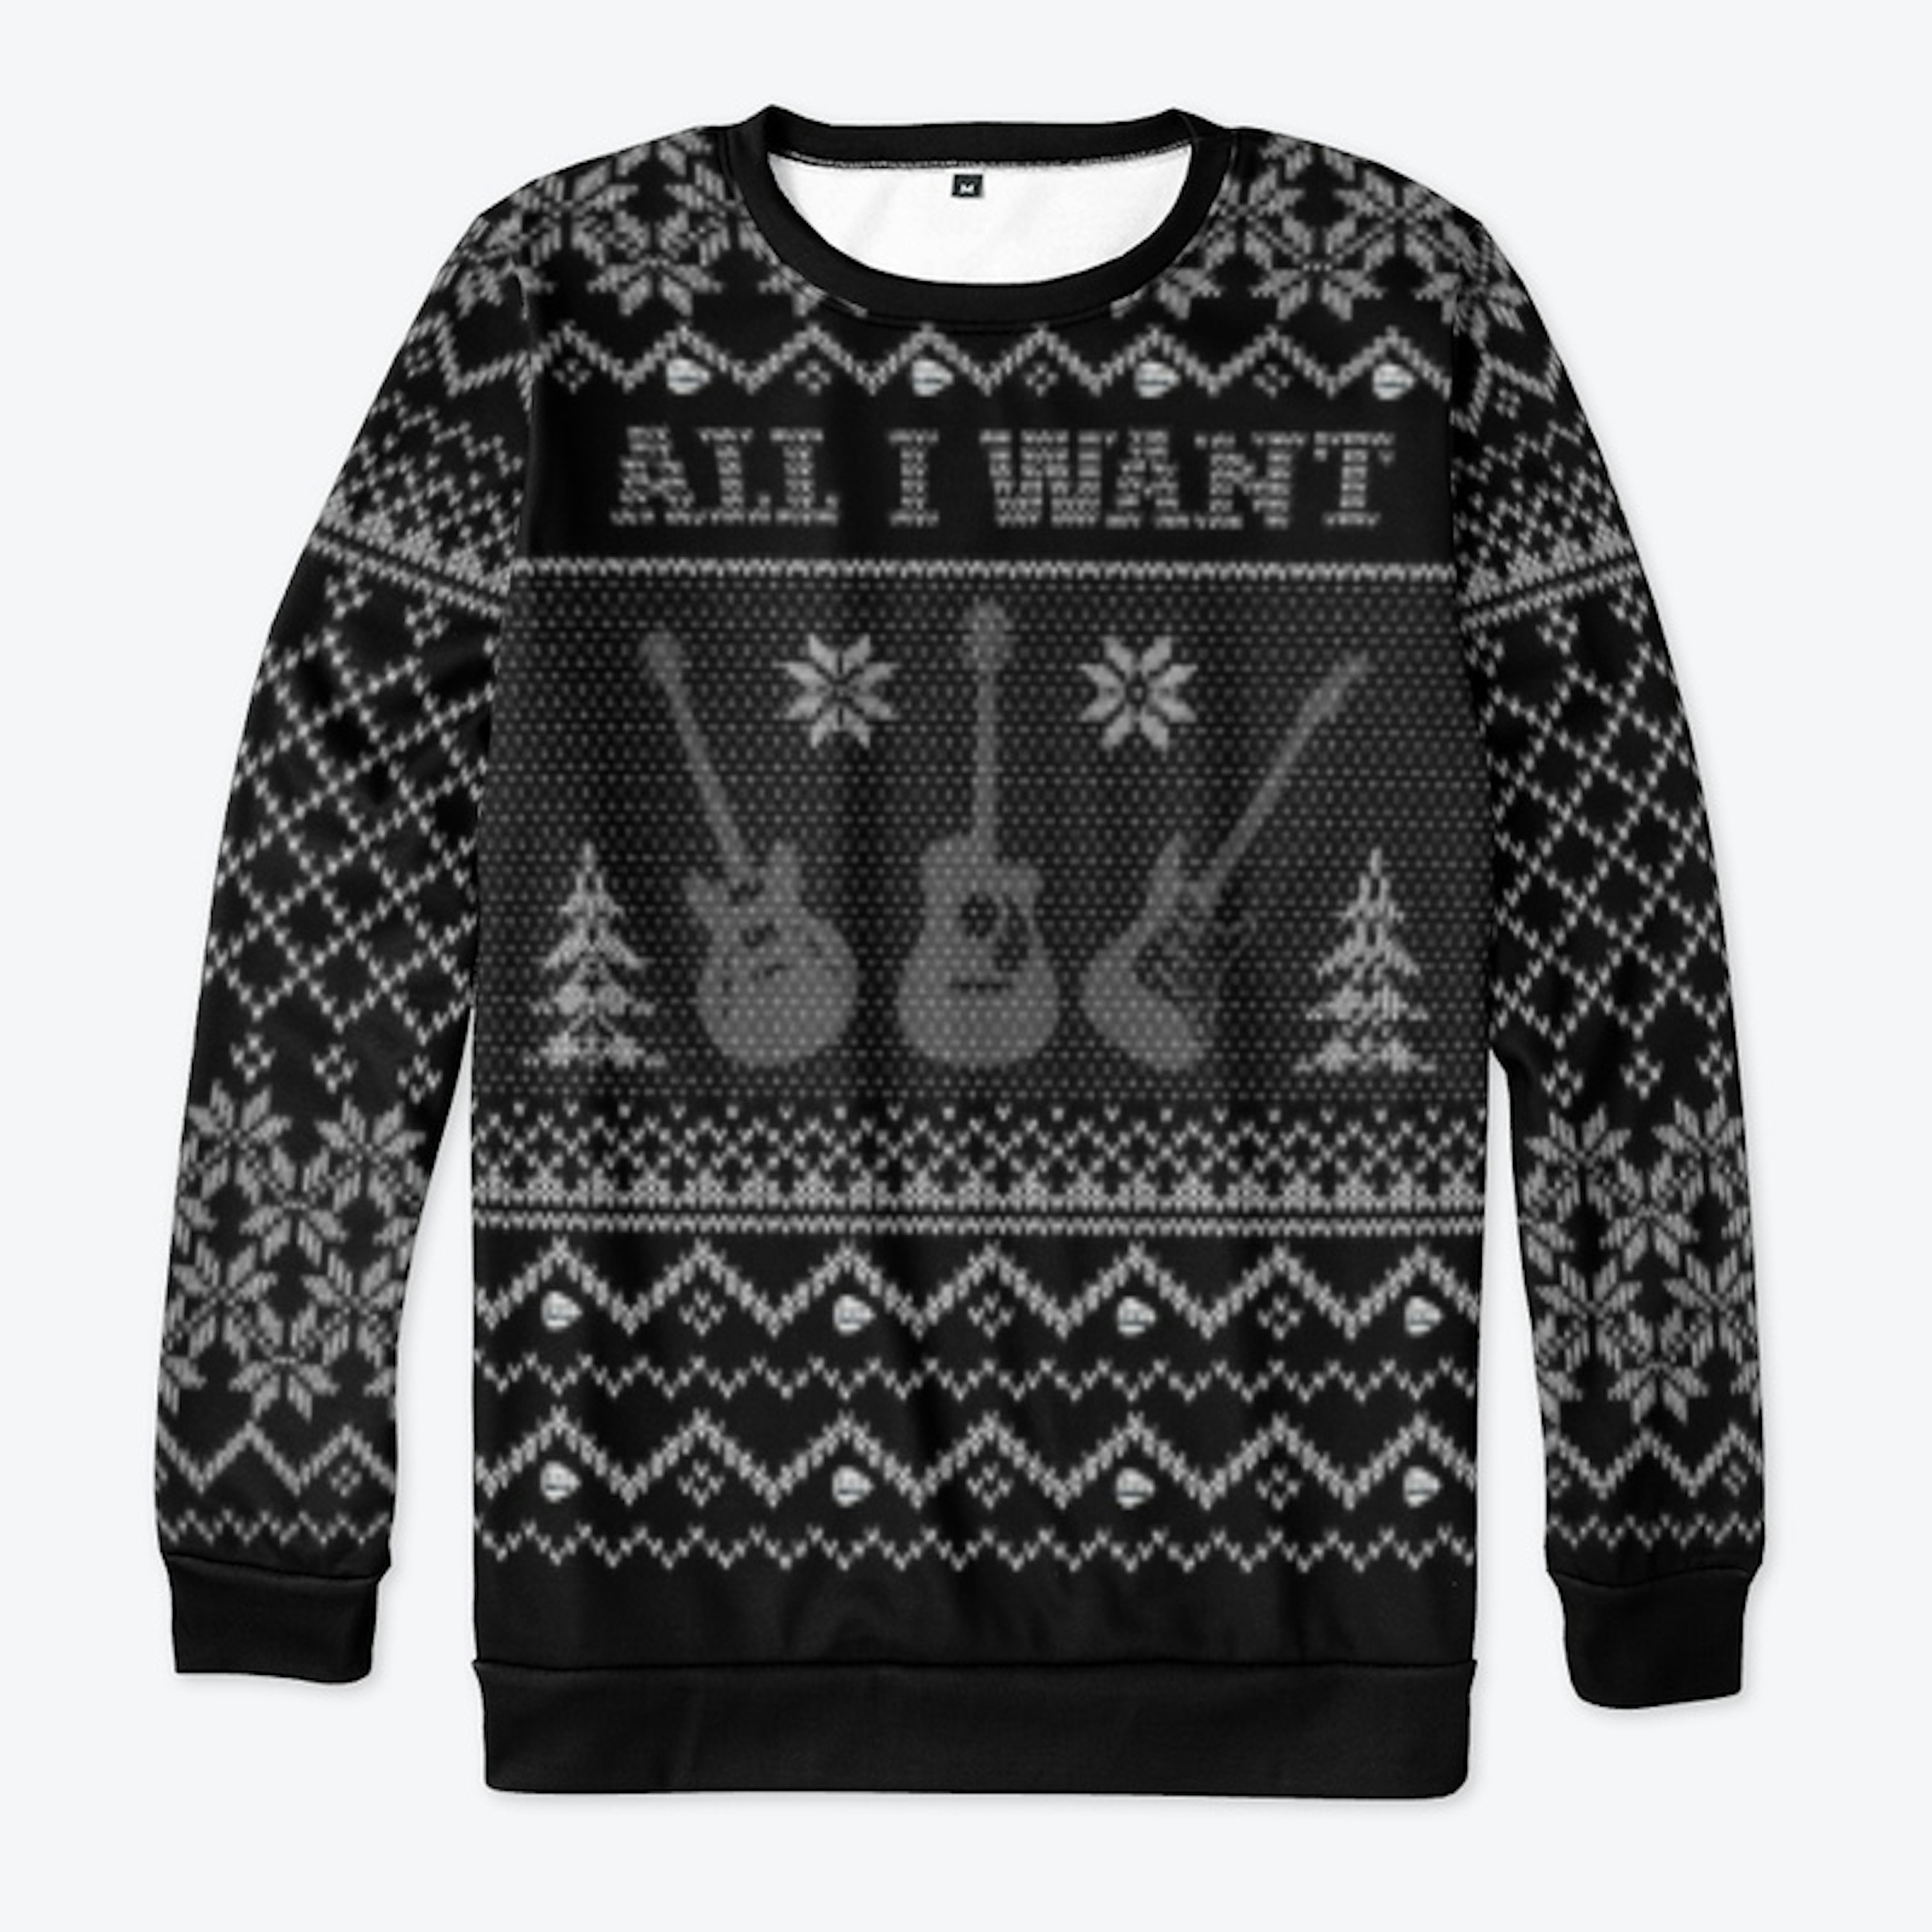 'All I Want' Holiday Guitar Jumper